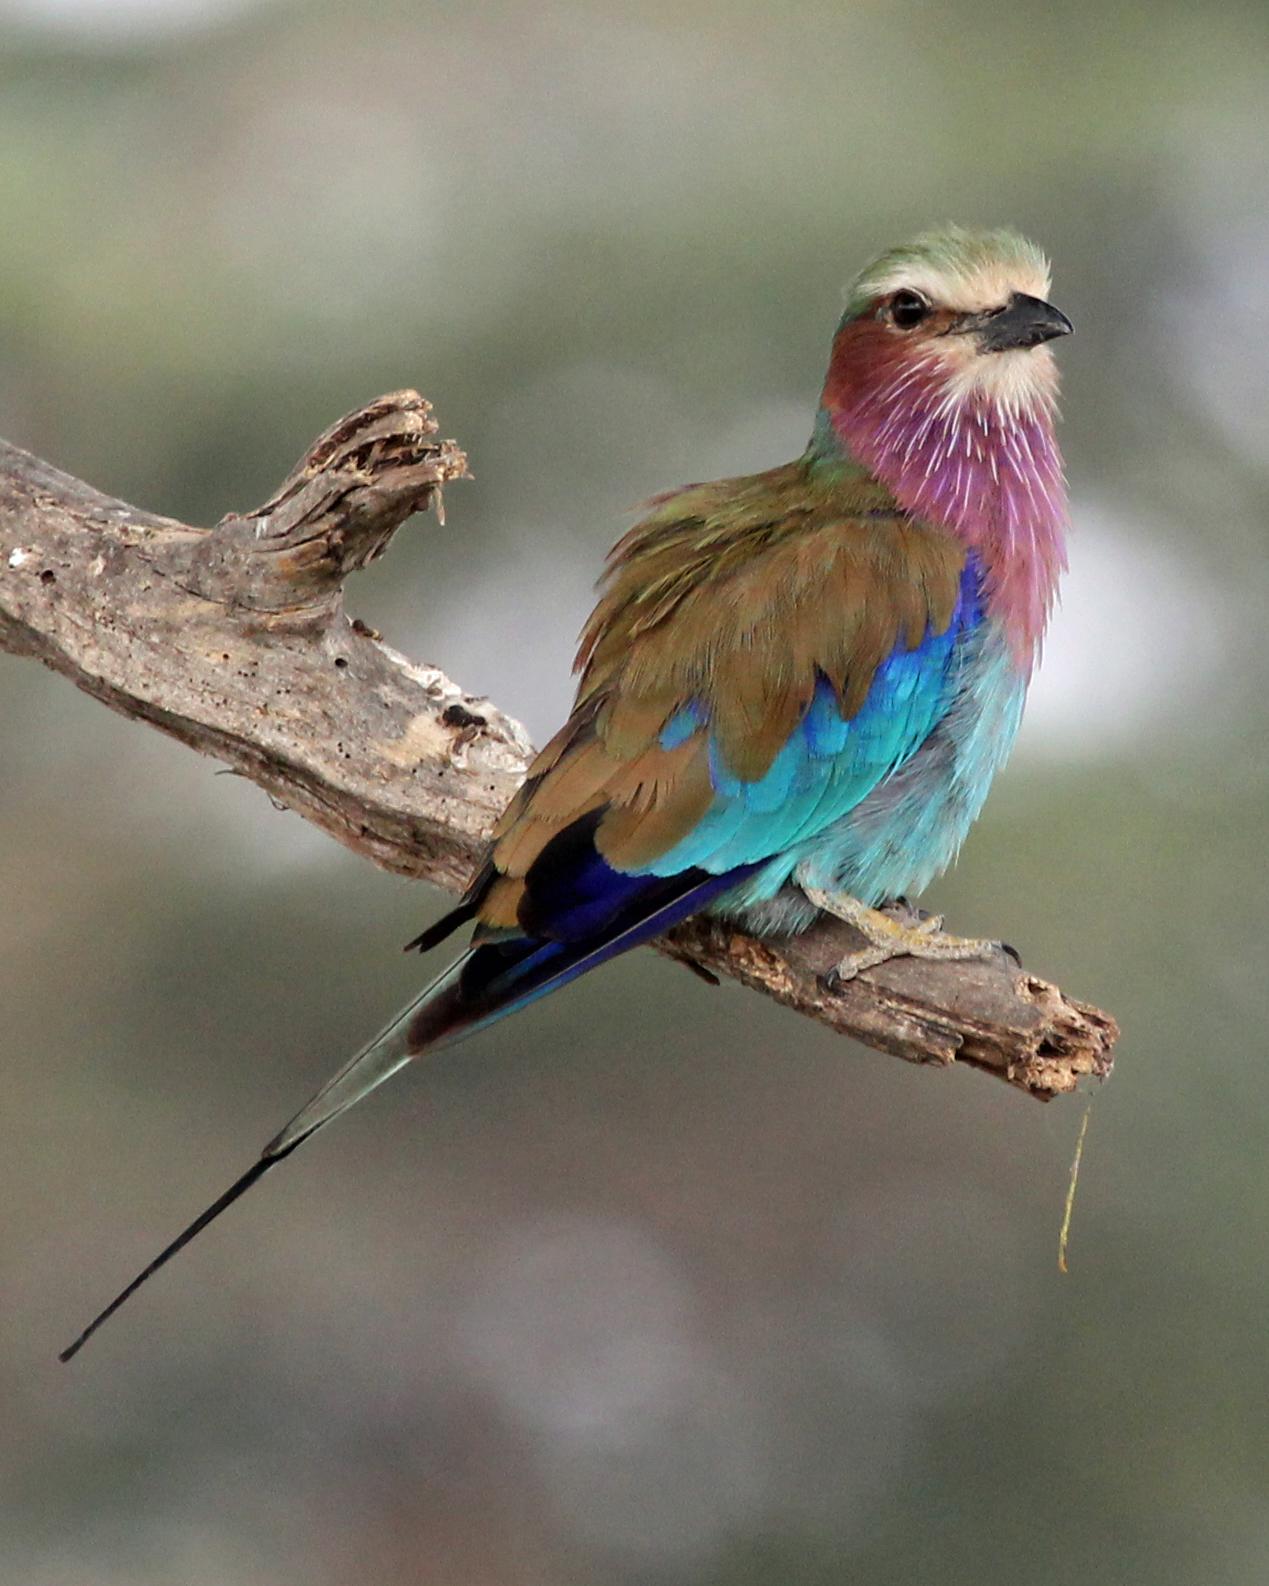 Lilac-breasted Roller Photo by Robert Polkinghorn